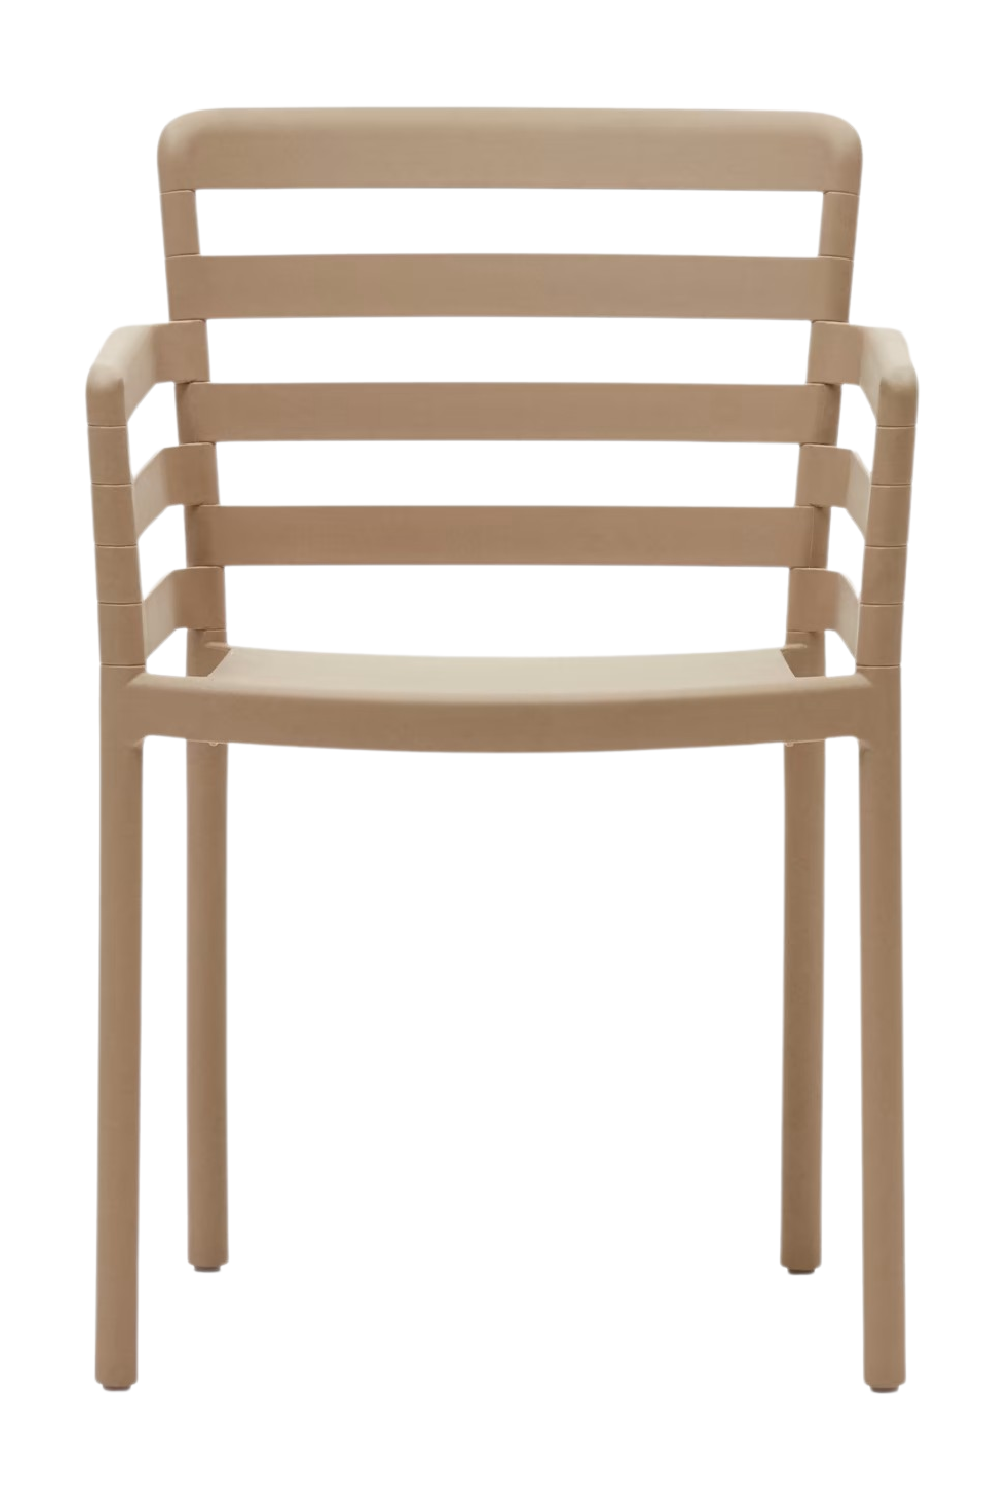 Modern Molded Outdoor Chairs (4) | La Forma Nariet | Oroa.com